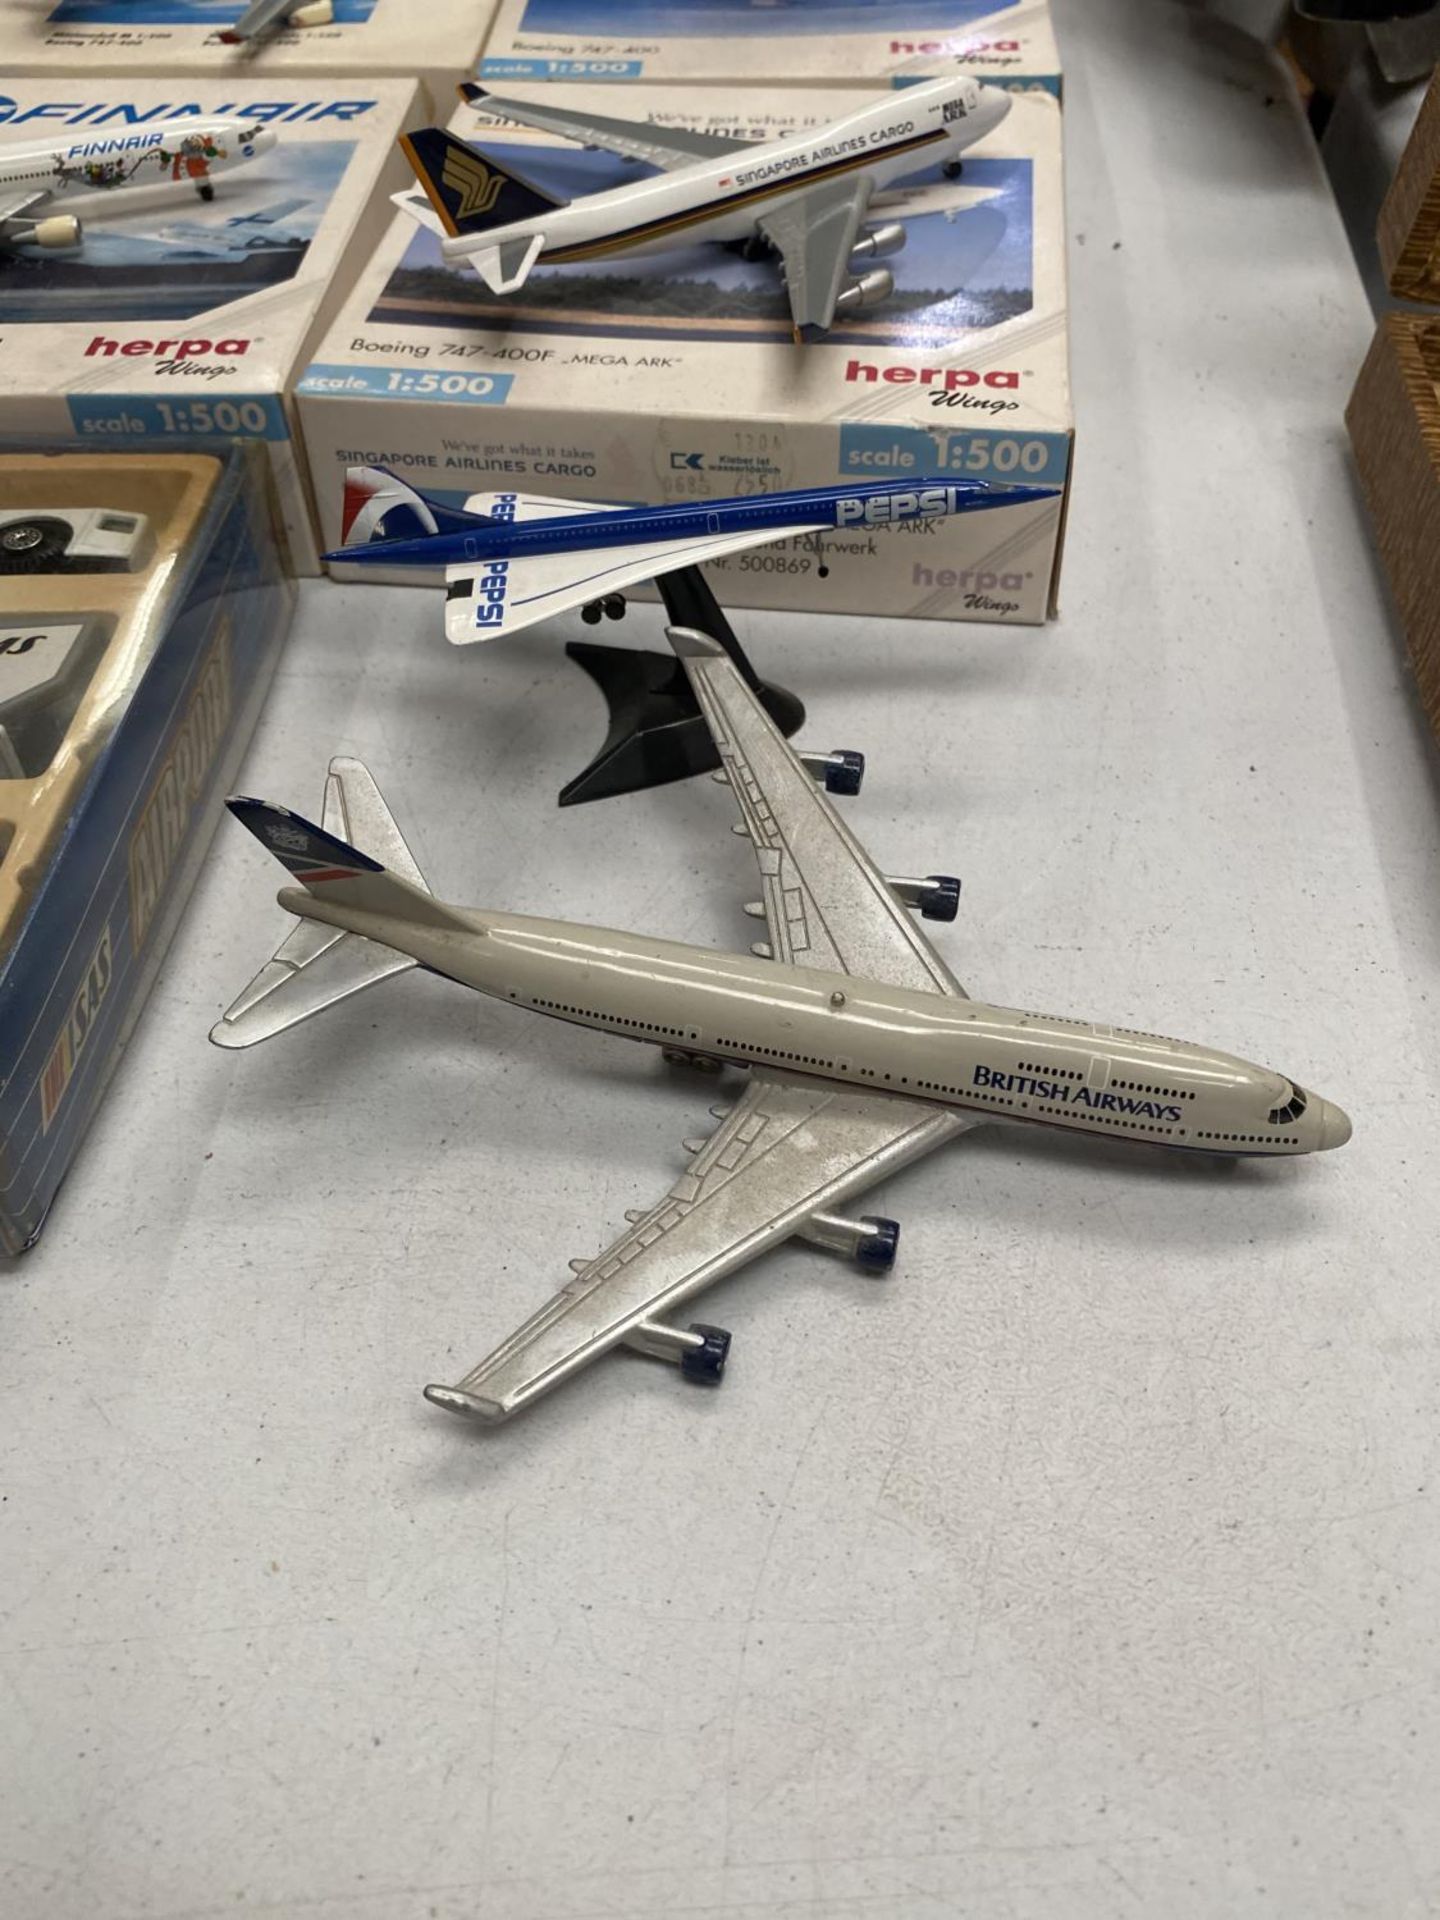 A COLLECTION OF MODEL AIRCRAFT MODELS - Image 4 of 4